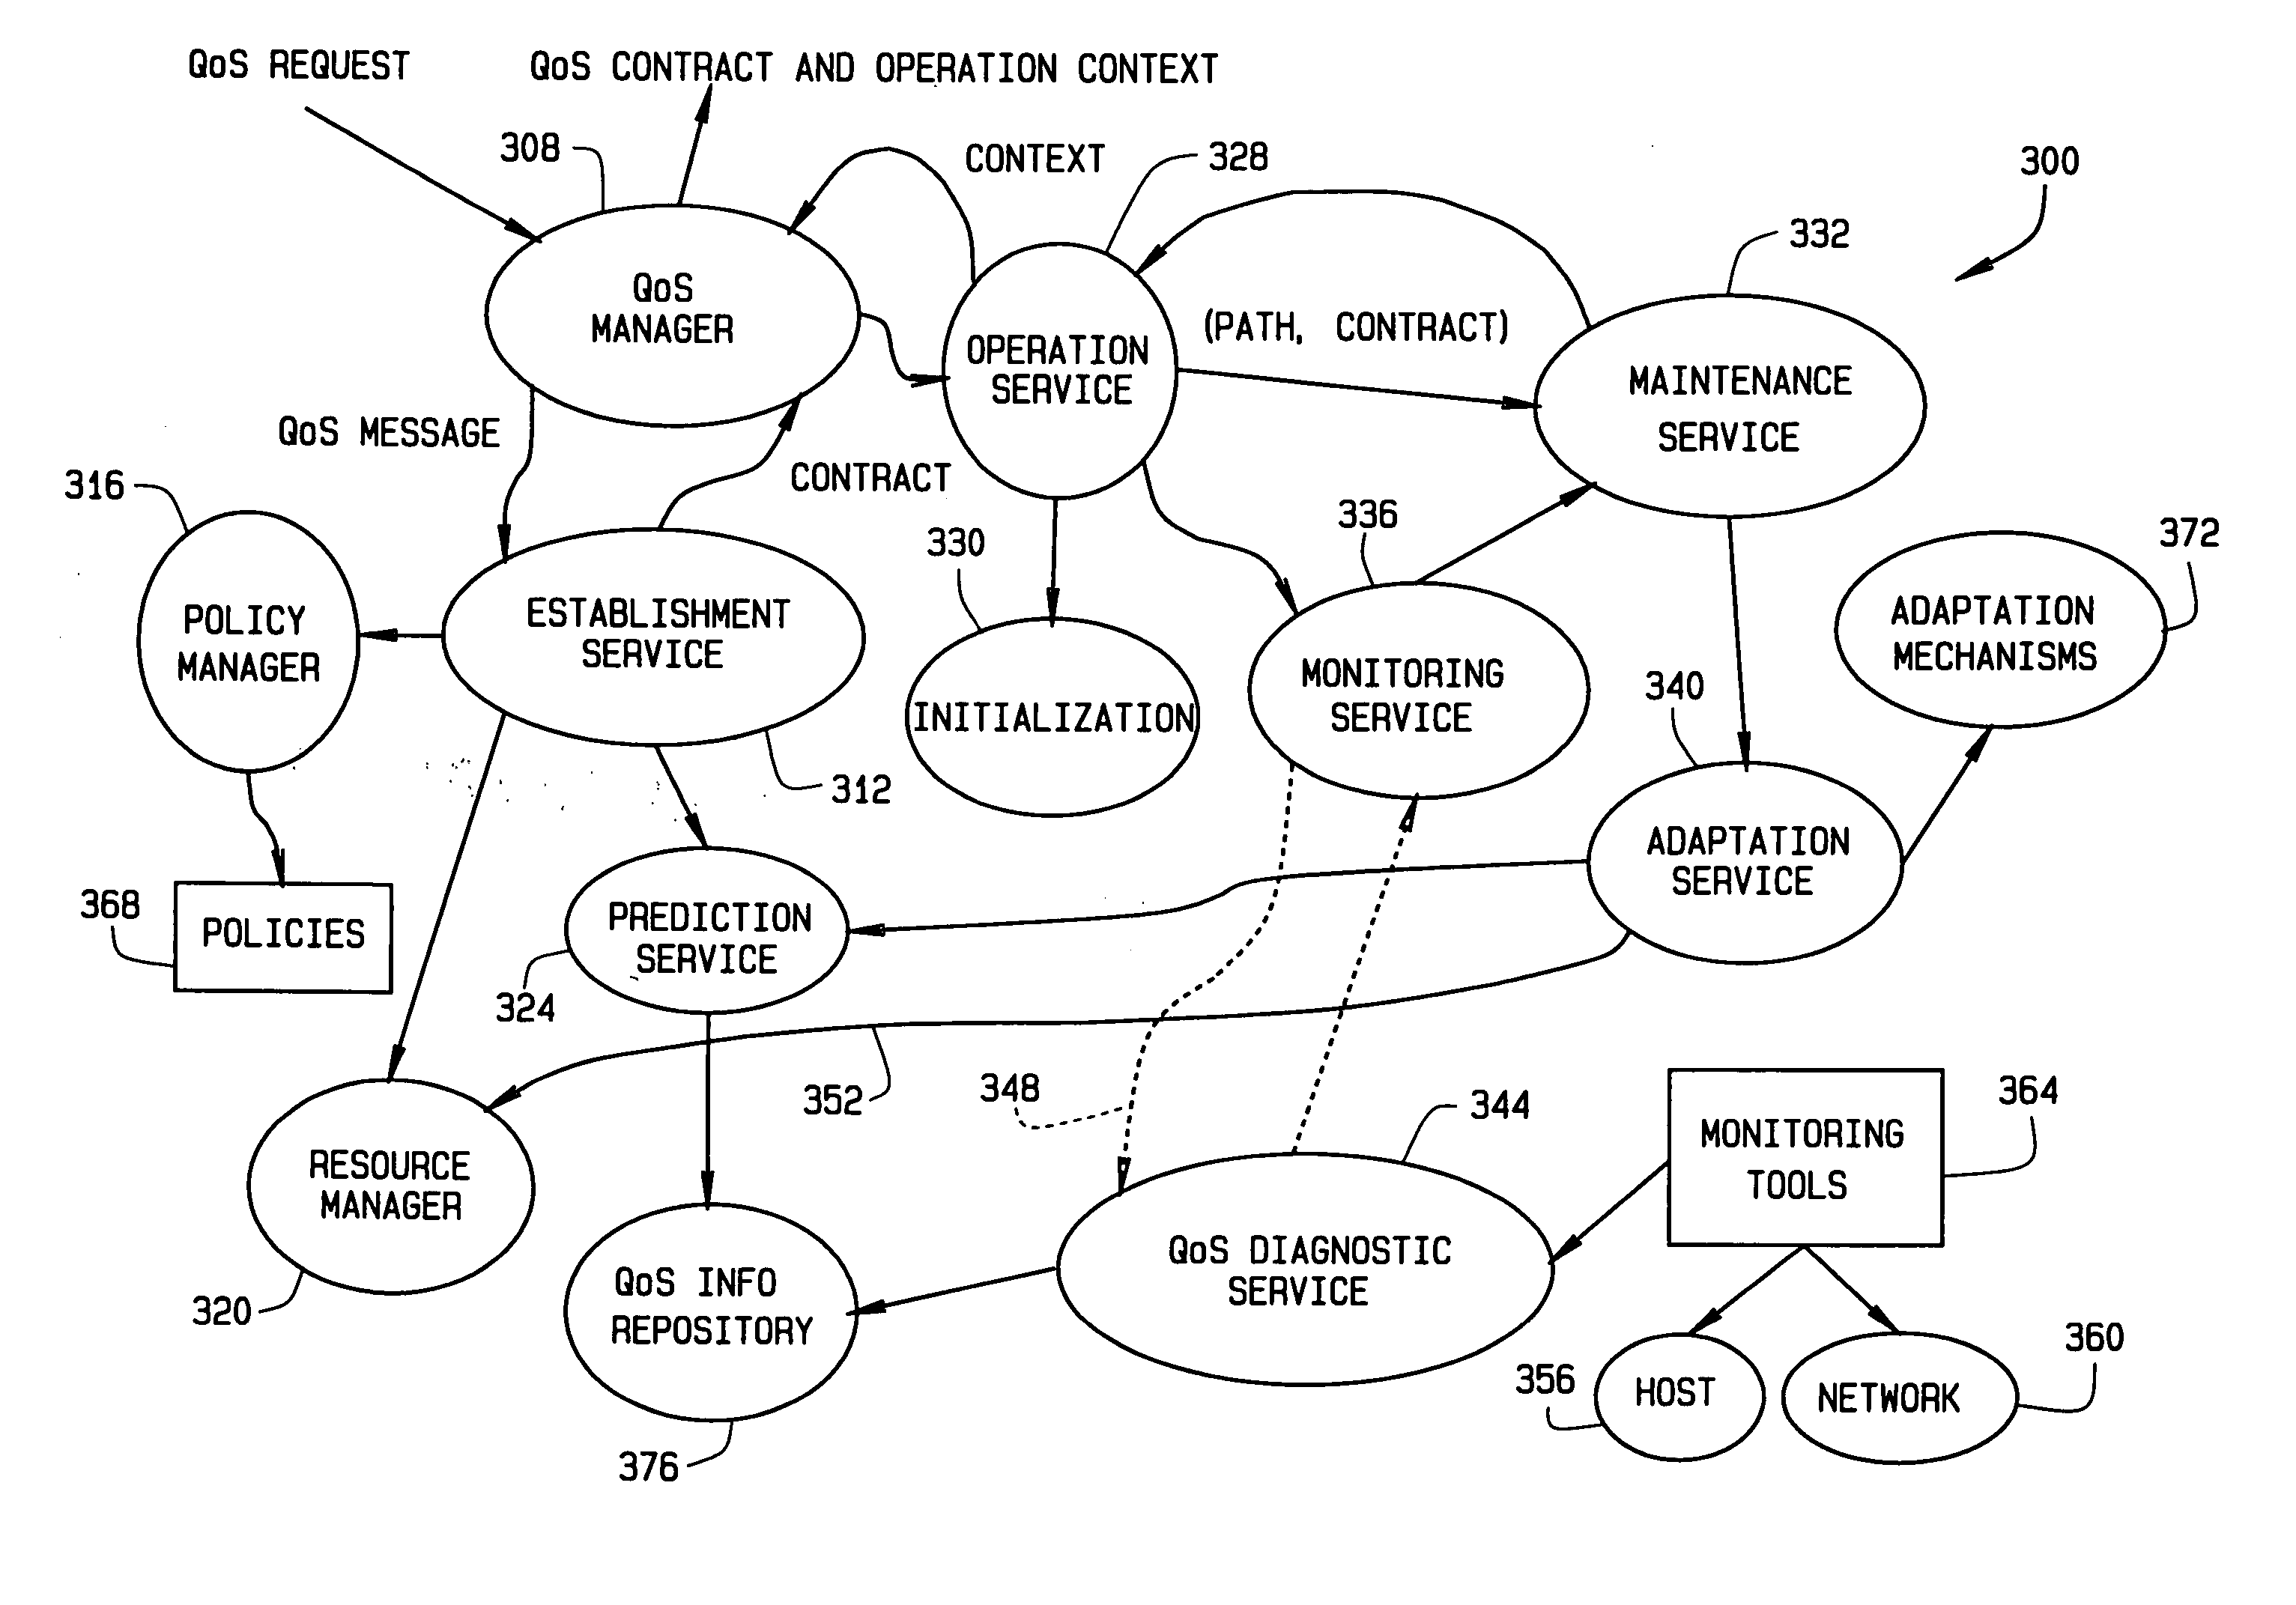 Quality of Service resource management apparatus and method for middleware services